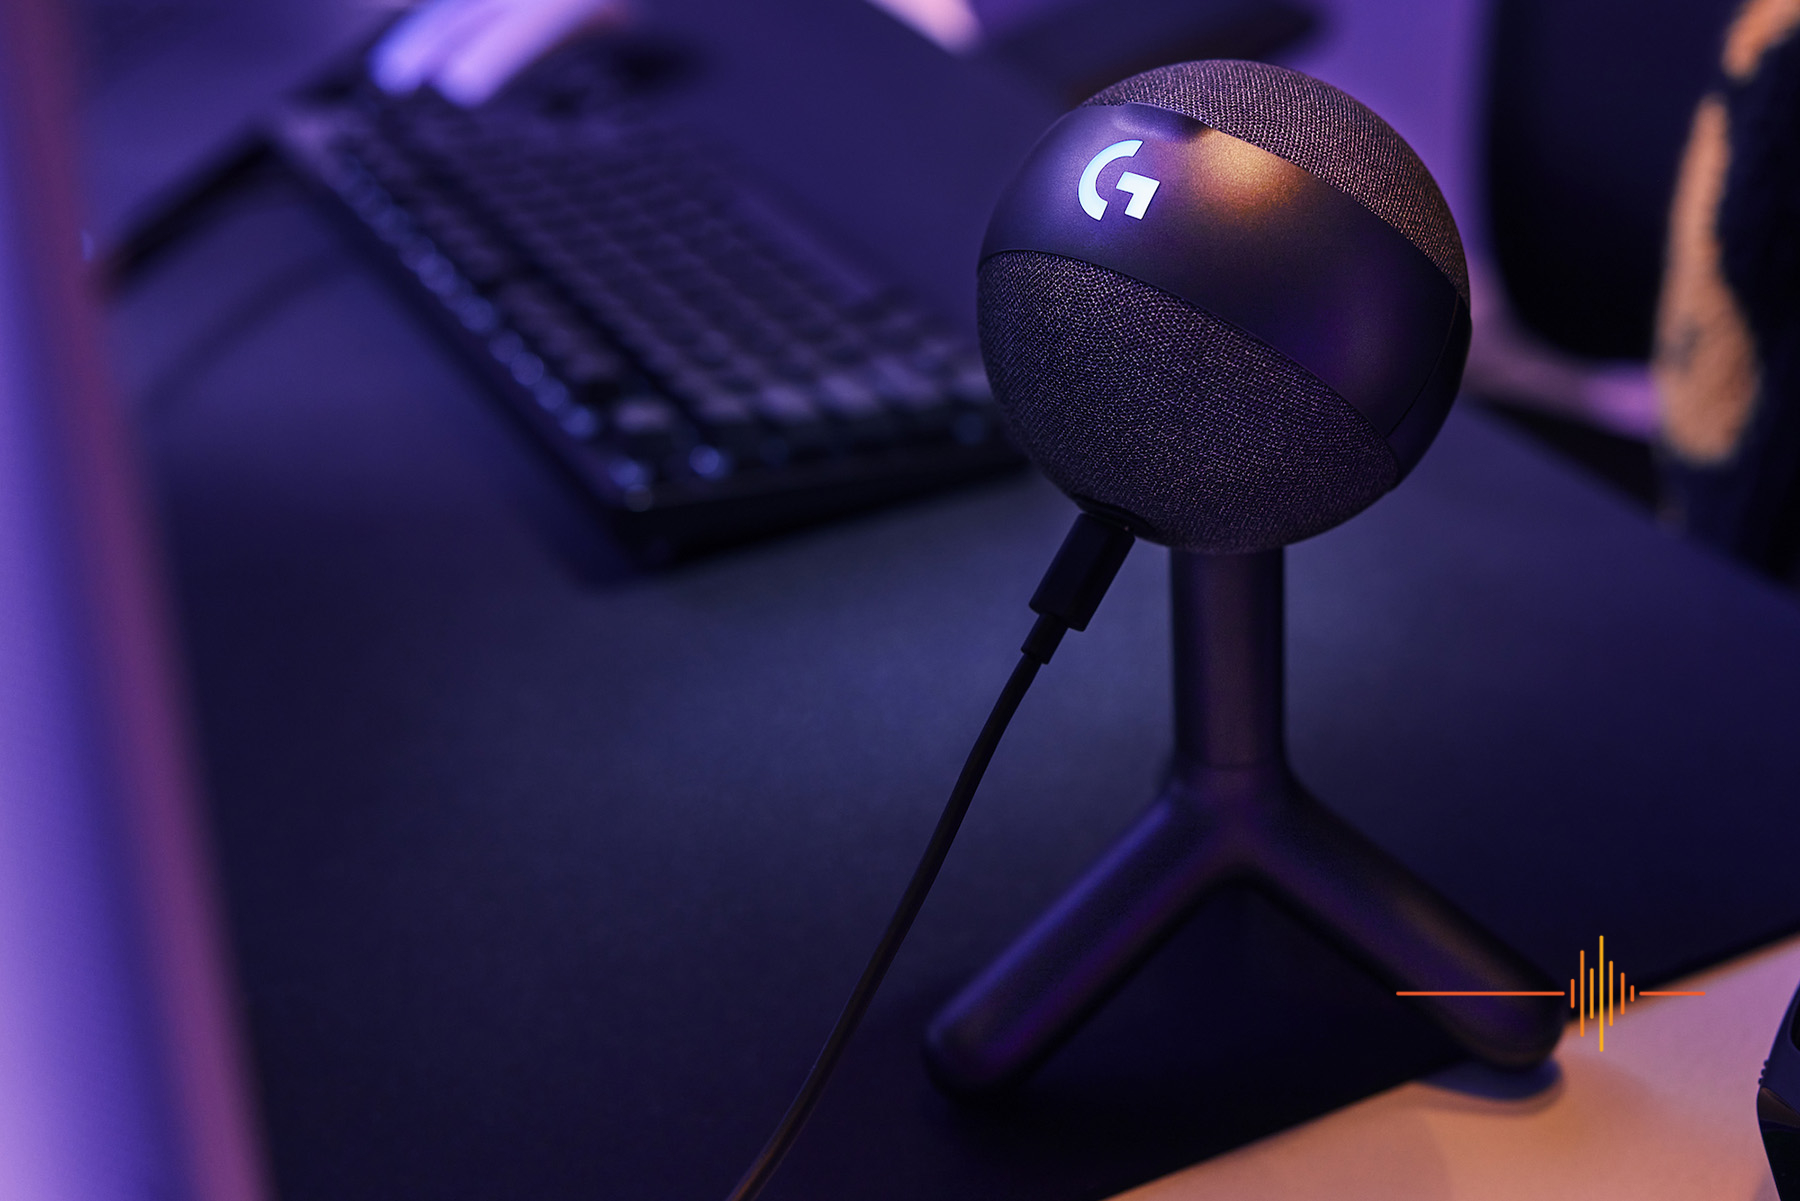 Logitech Yeti GX review - a great-sounding microphone for streamers